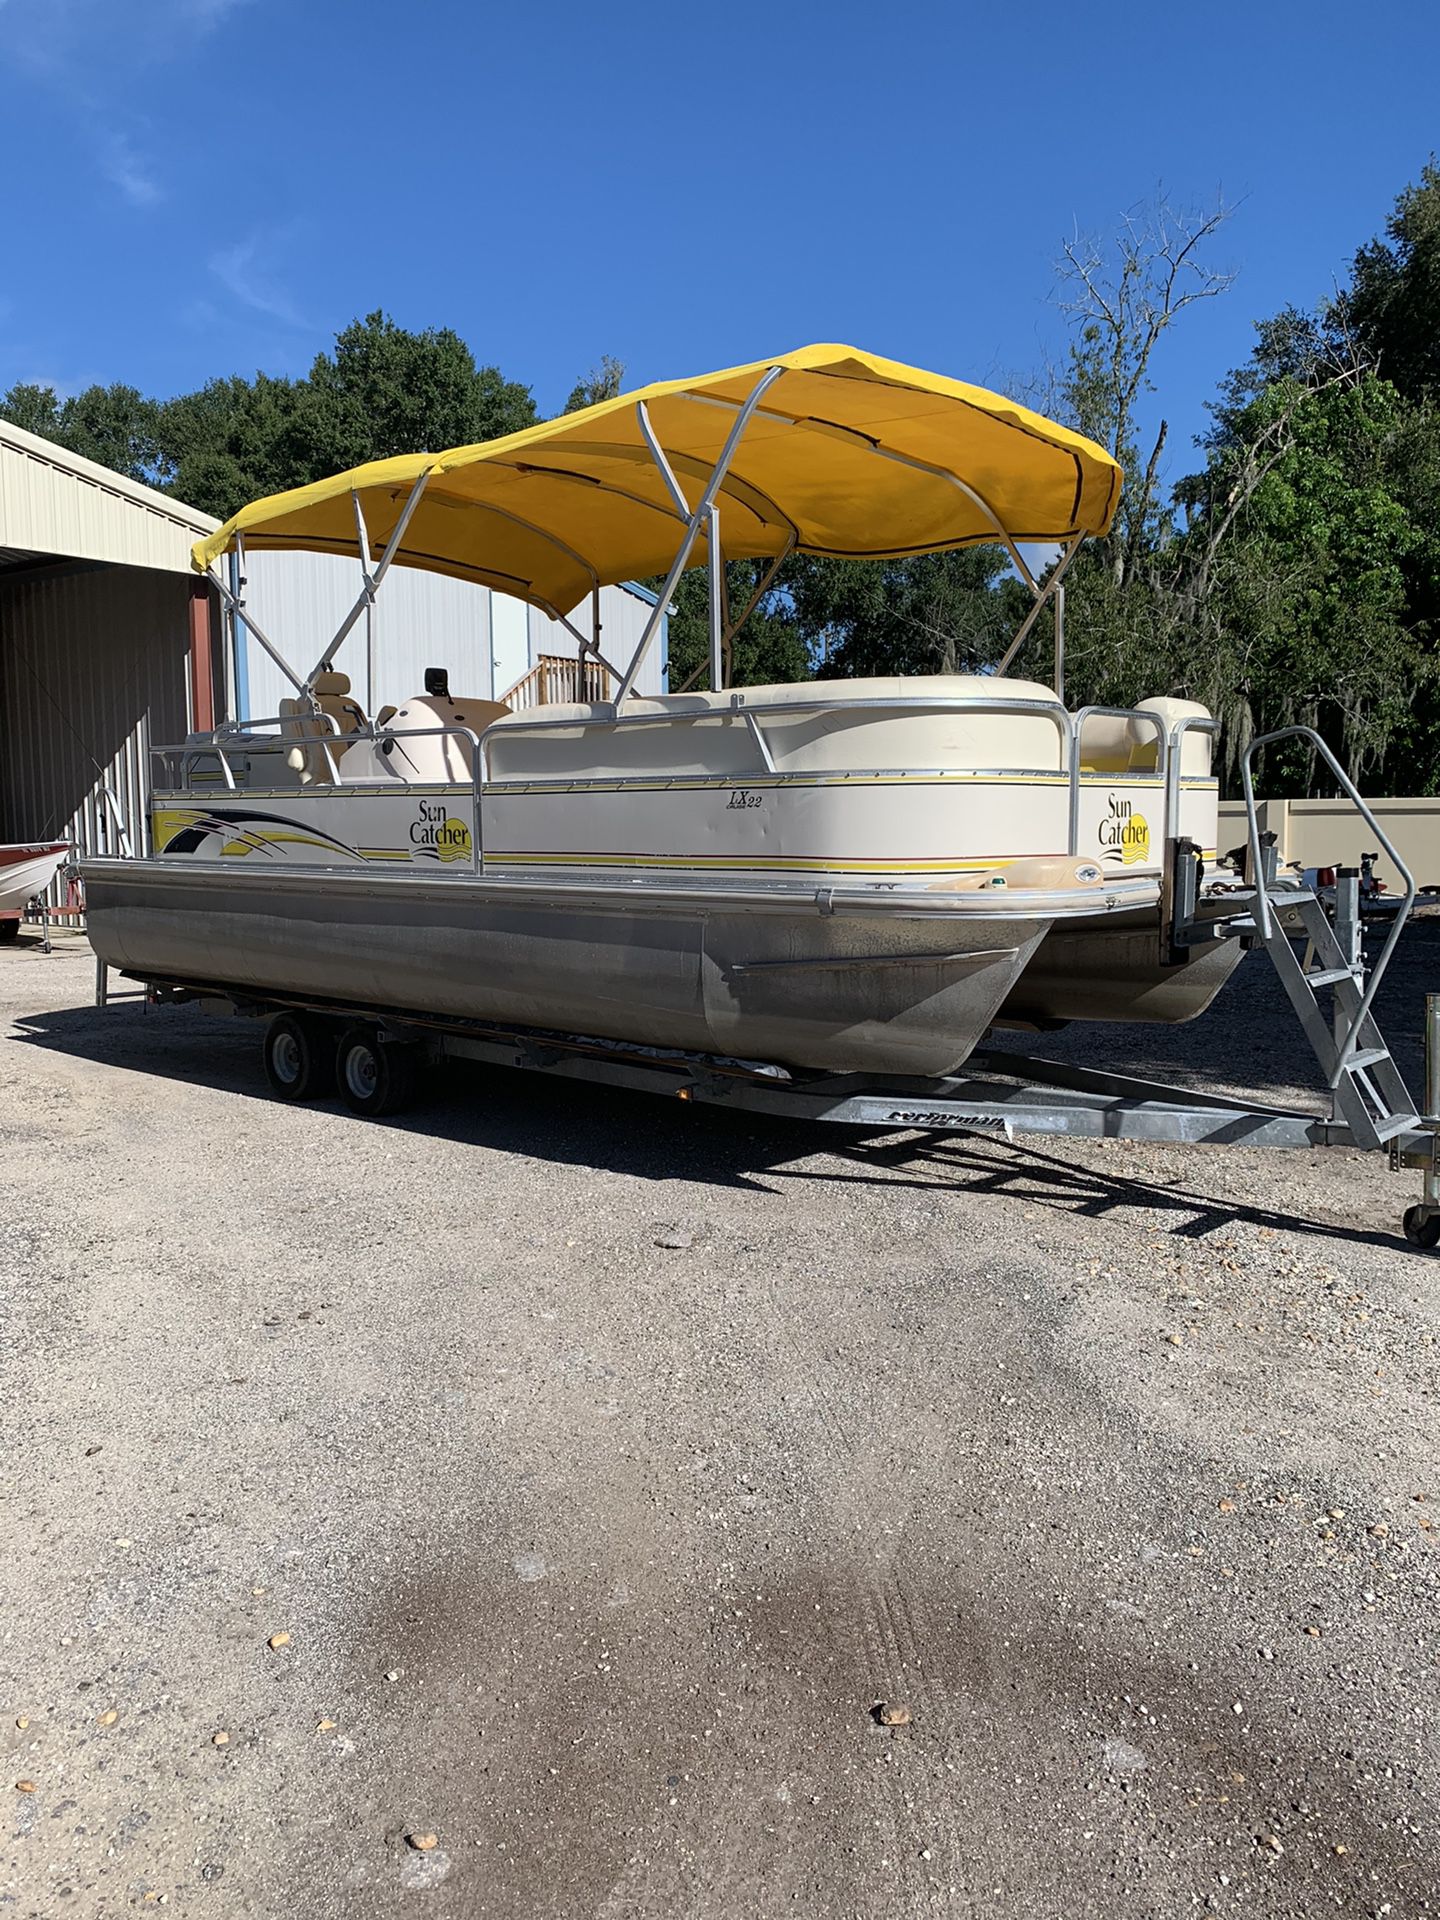 2006, 22 foot pontoon boat with trailer, 60 Yamaha motor with 132 hours on it.must see.